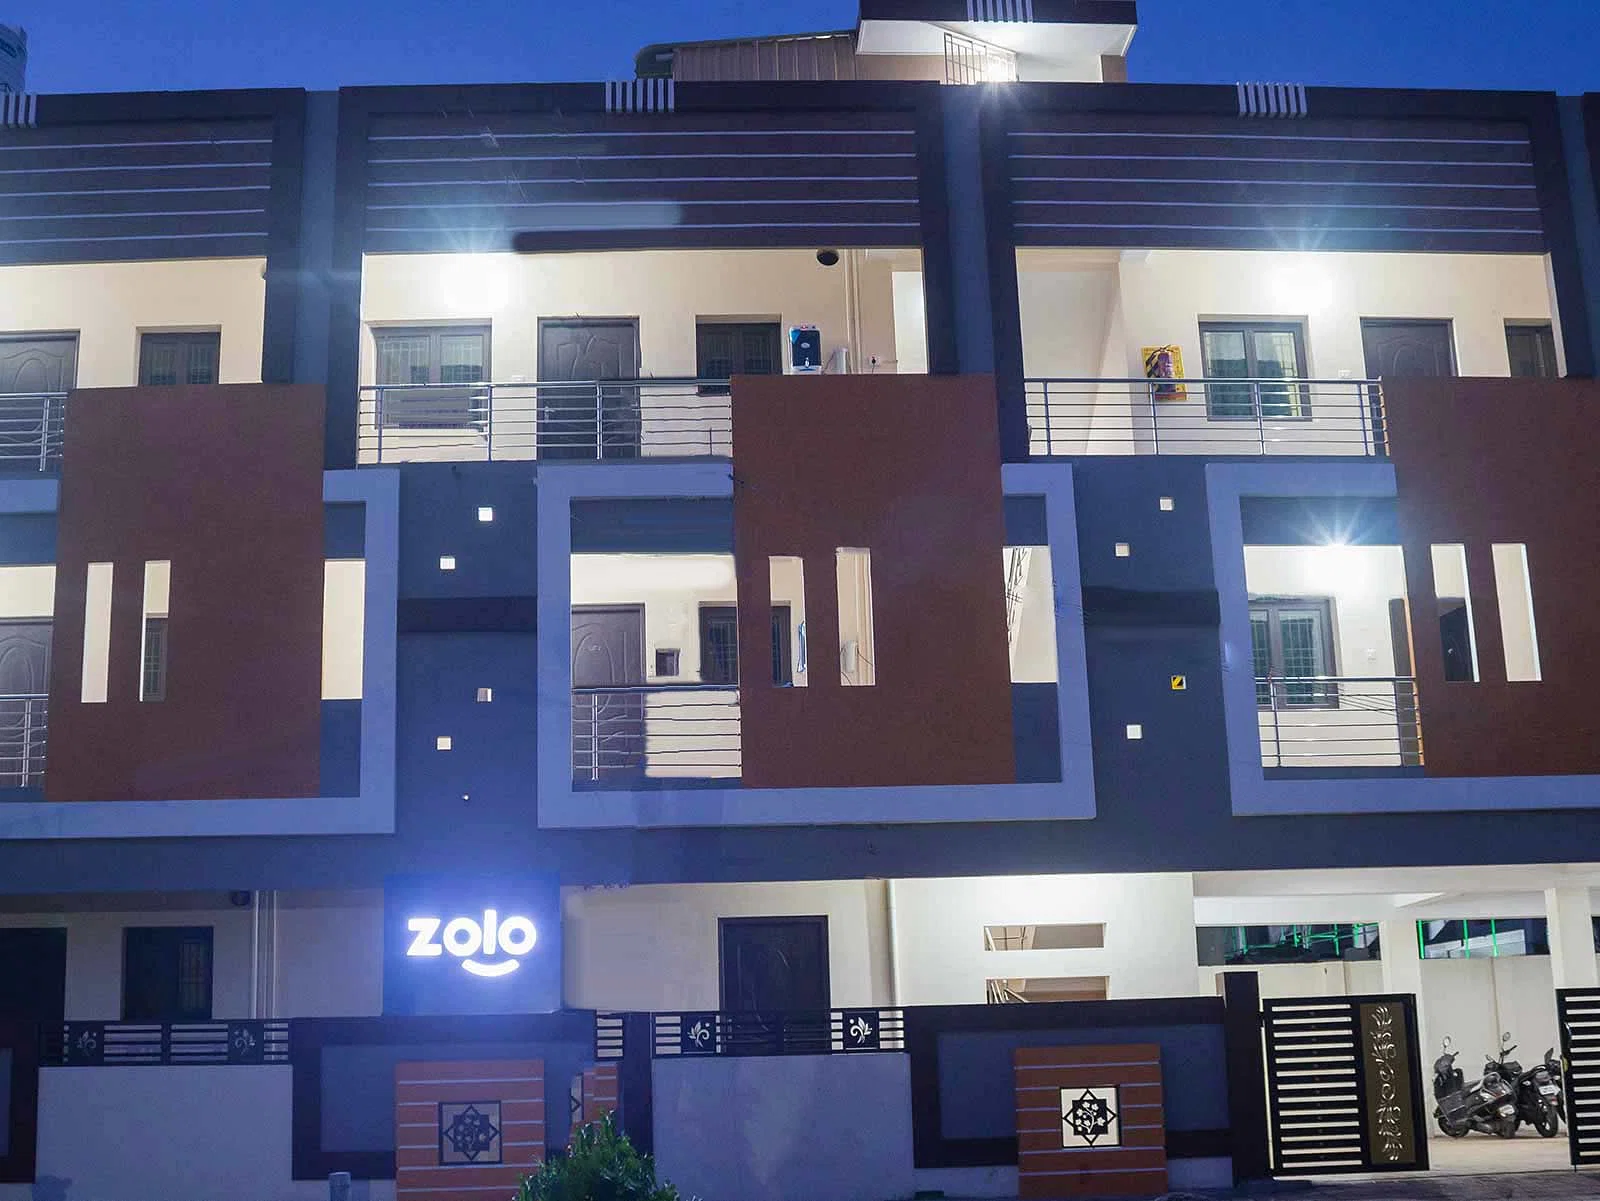 safe and affordable hostels for men students with 24/7 security and CCTV surveillance-Zolo Tide